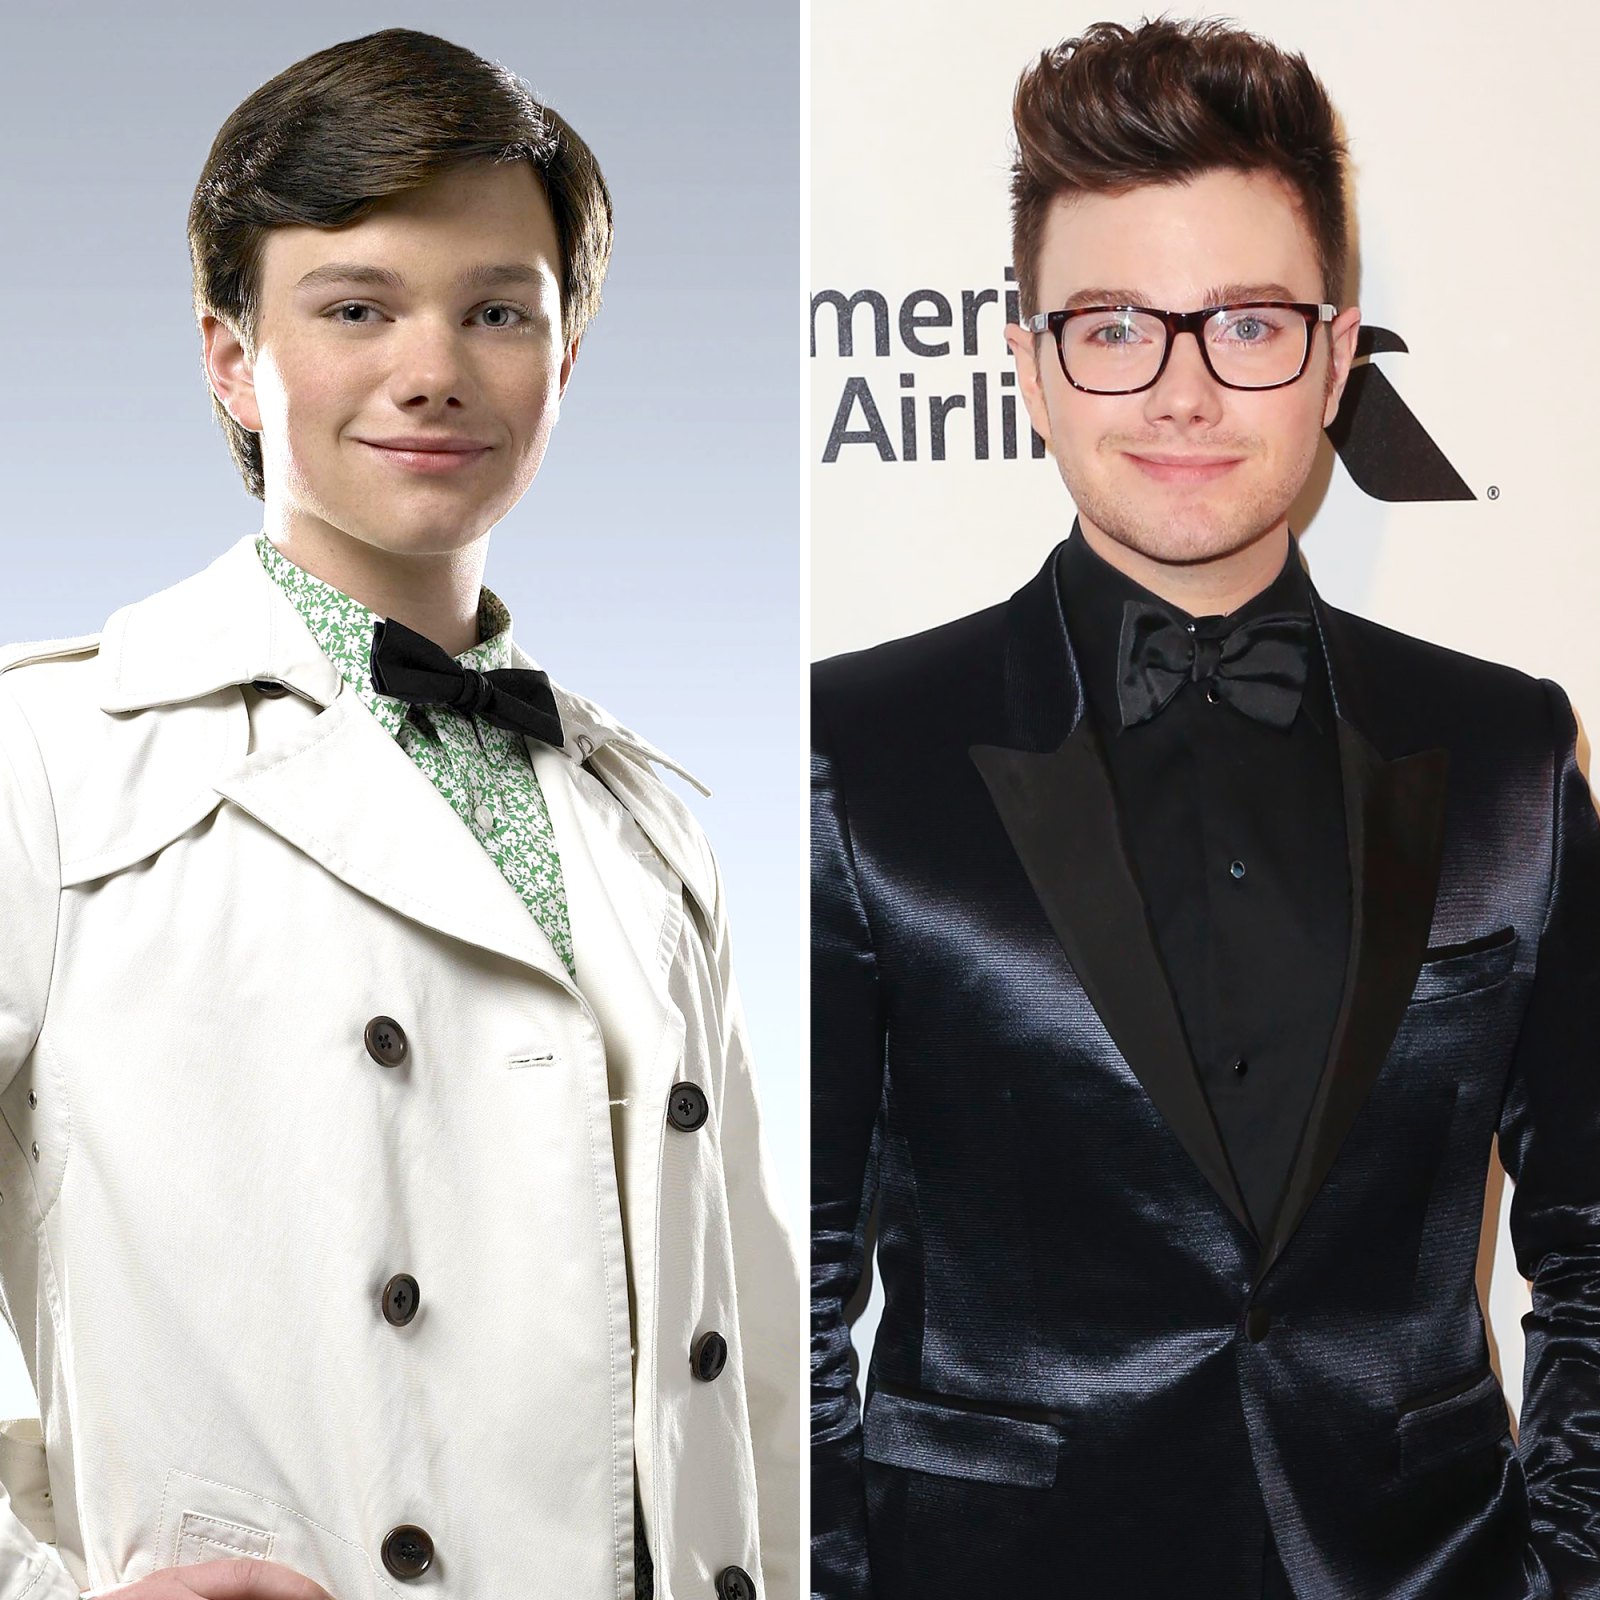 Chris Colfer Glee Where Are They Now